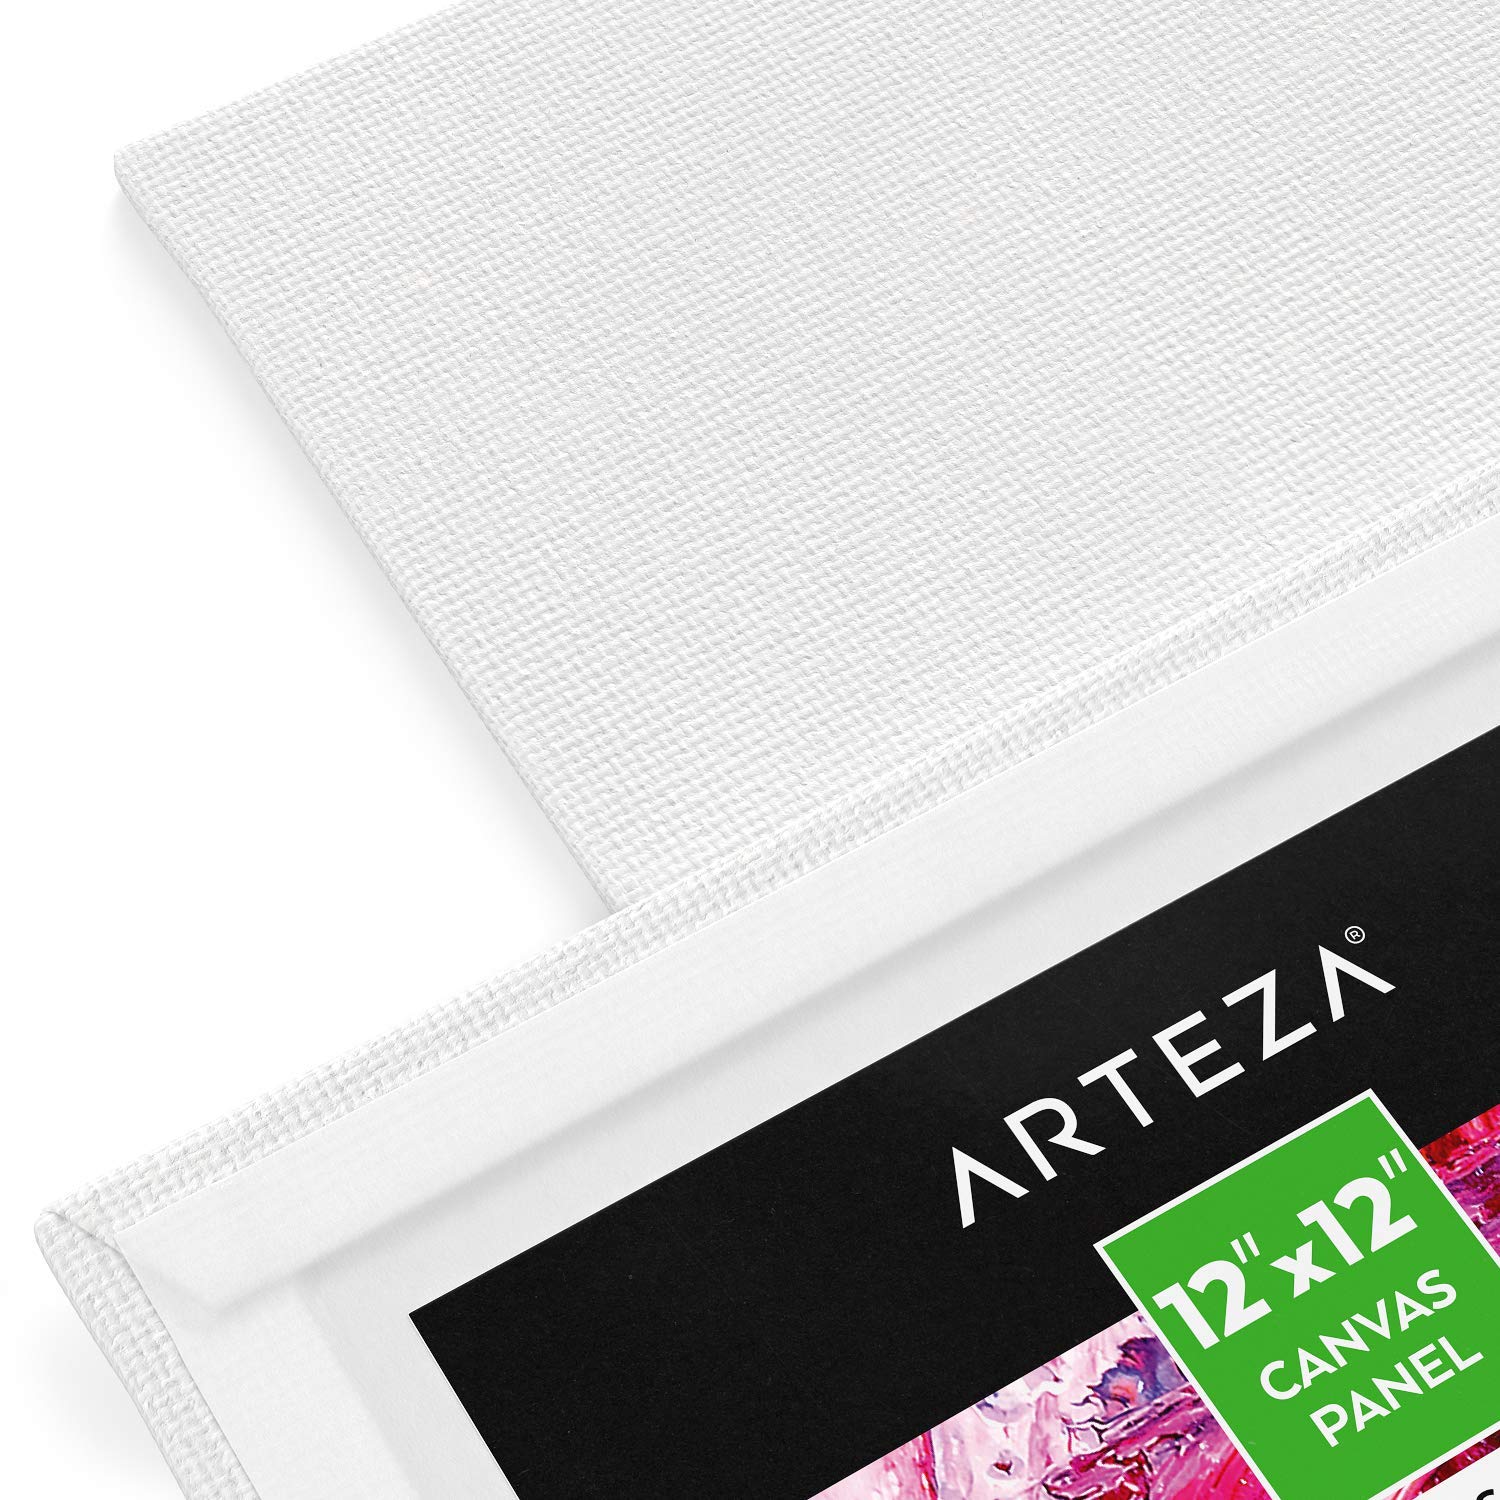 ARTEZA Canvases for Painting, Bulk Pack of 14, 12 x 12 Inches, Primed, 100% Cotton Blank Art Canvas Boards for Acrylic Pouring and Oil Painting, Art Supplies for Adults and Teens